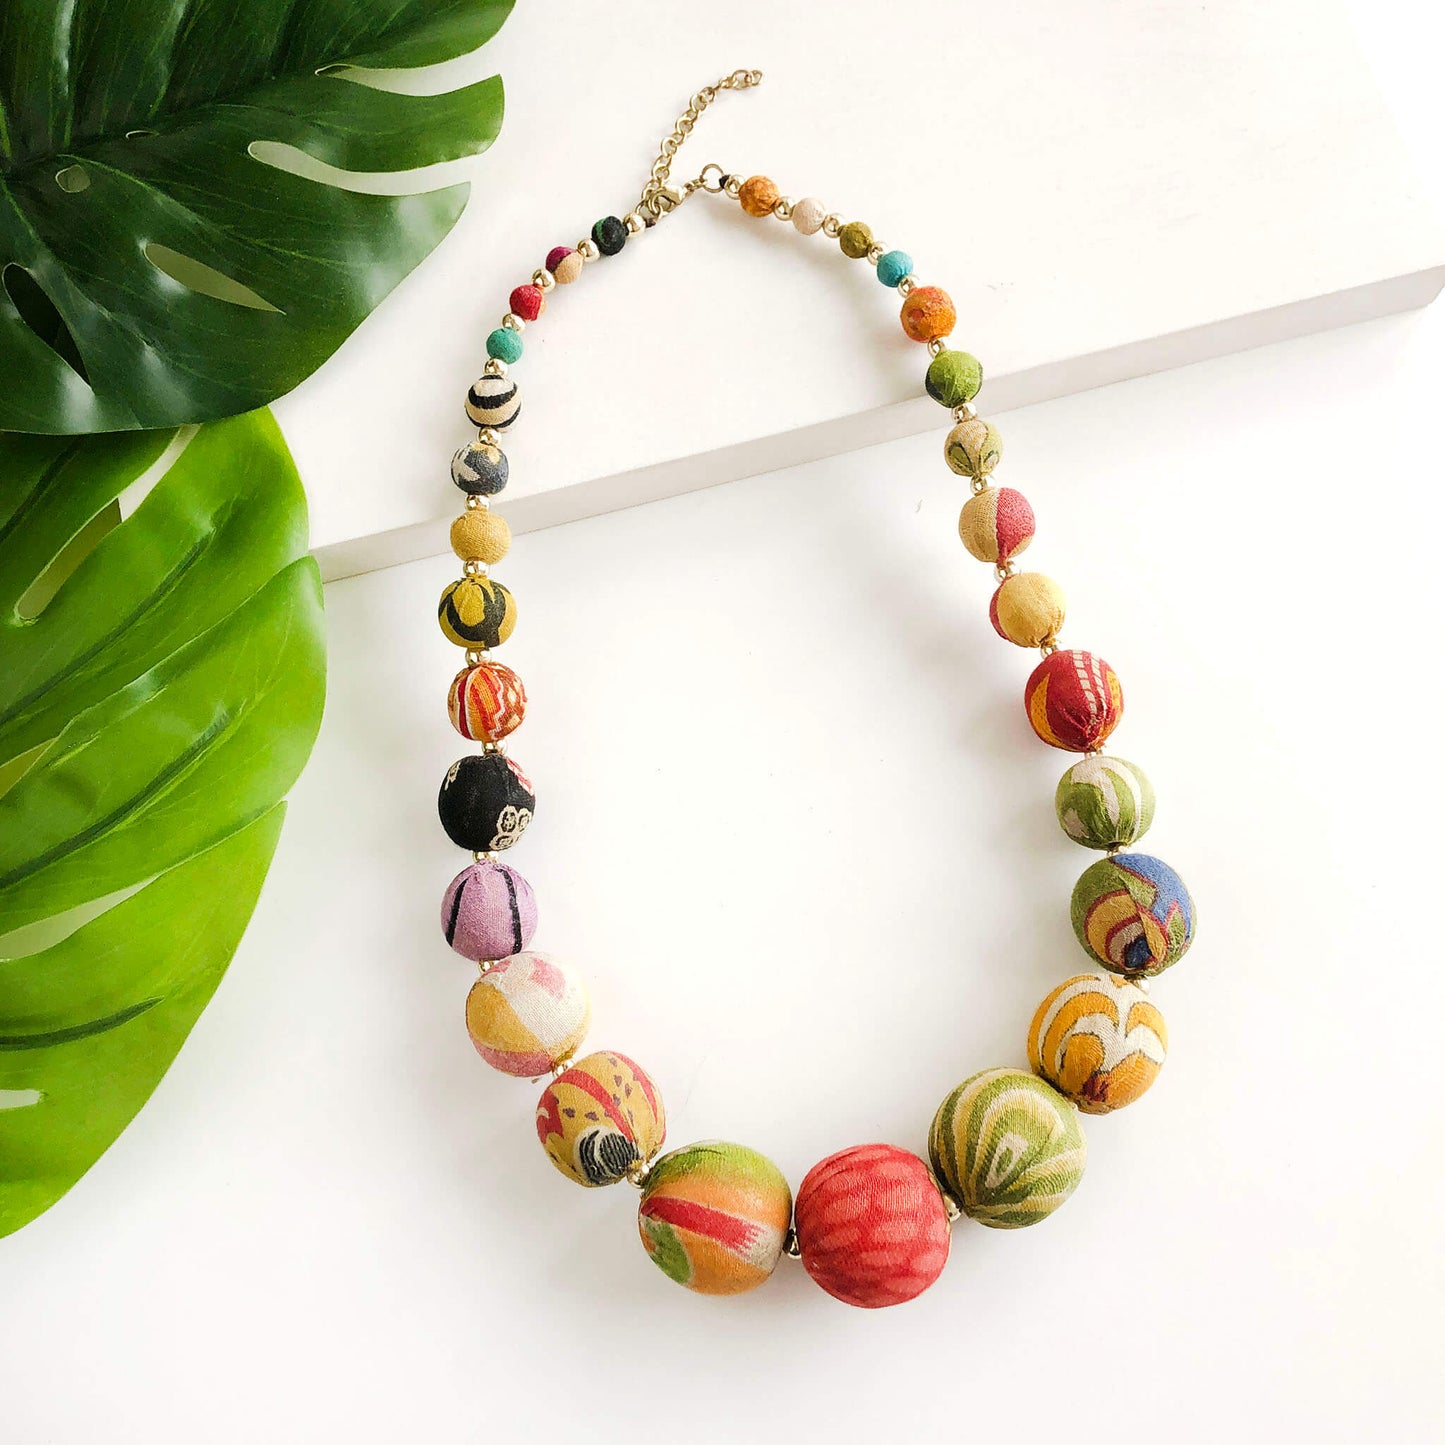 A colorful selection of textile-wrapped beads alternates with tiny golden beads to form this graduated strand.